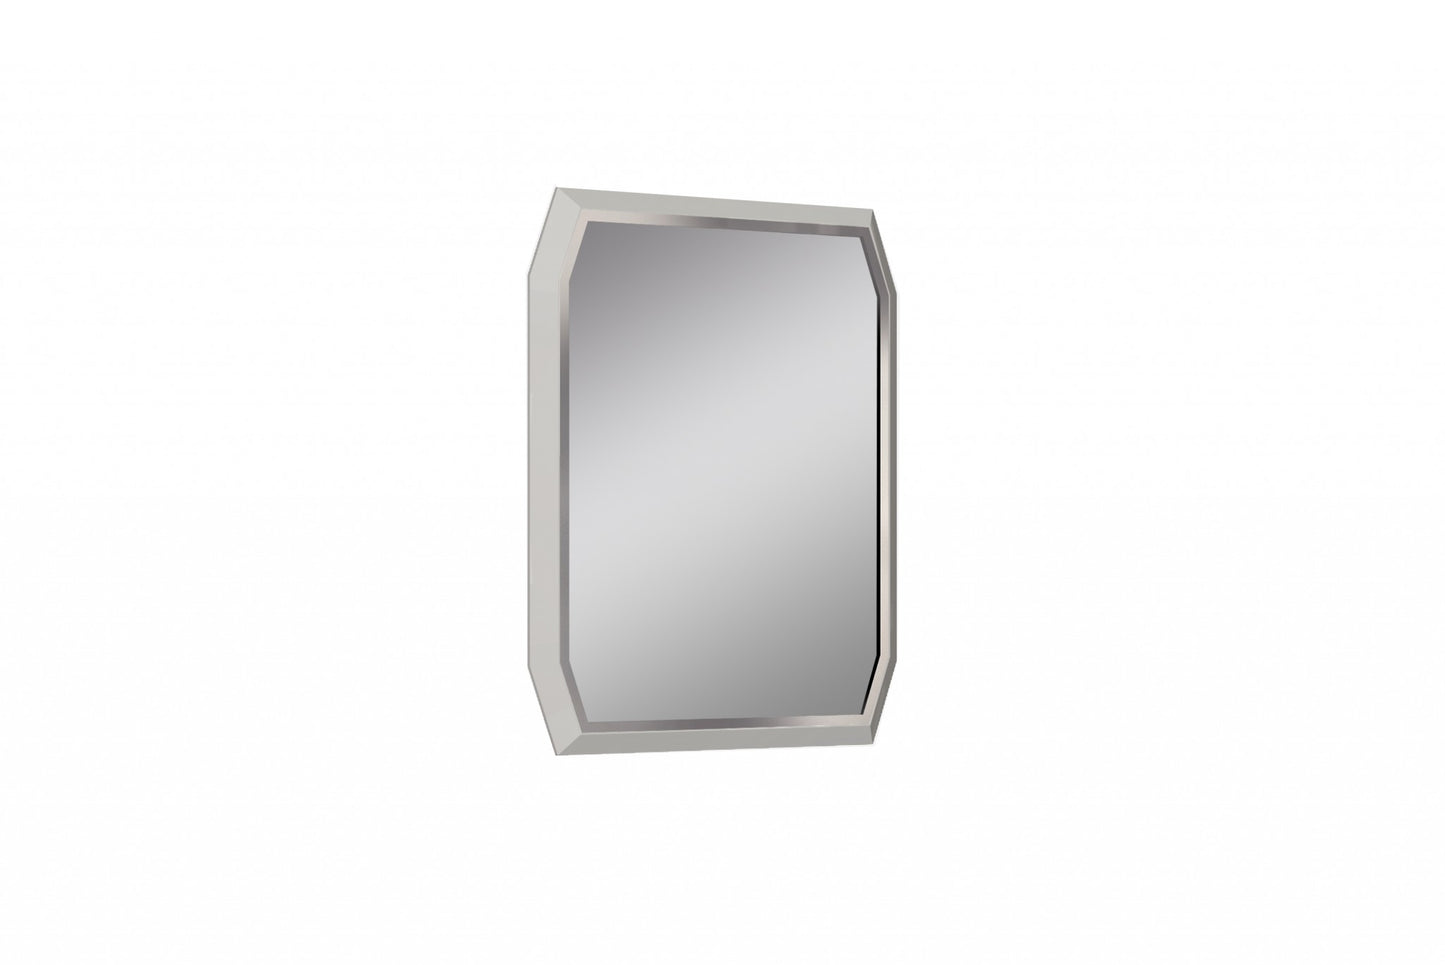 49" Taupe Abstract Glass Framed Accent Mirror